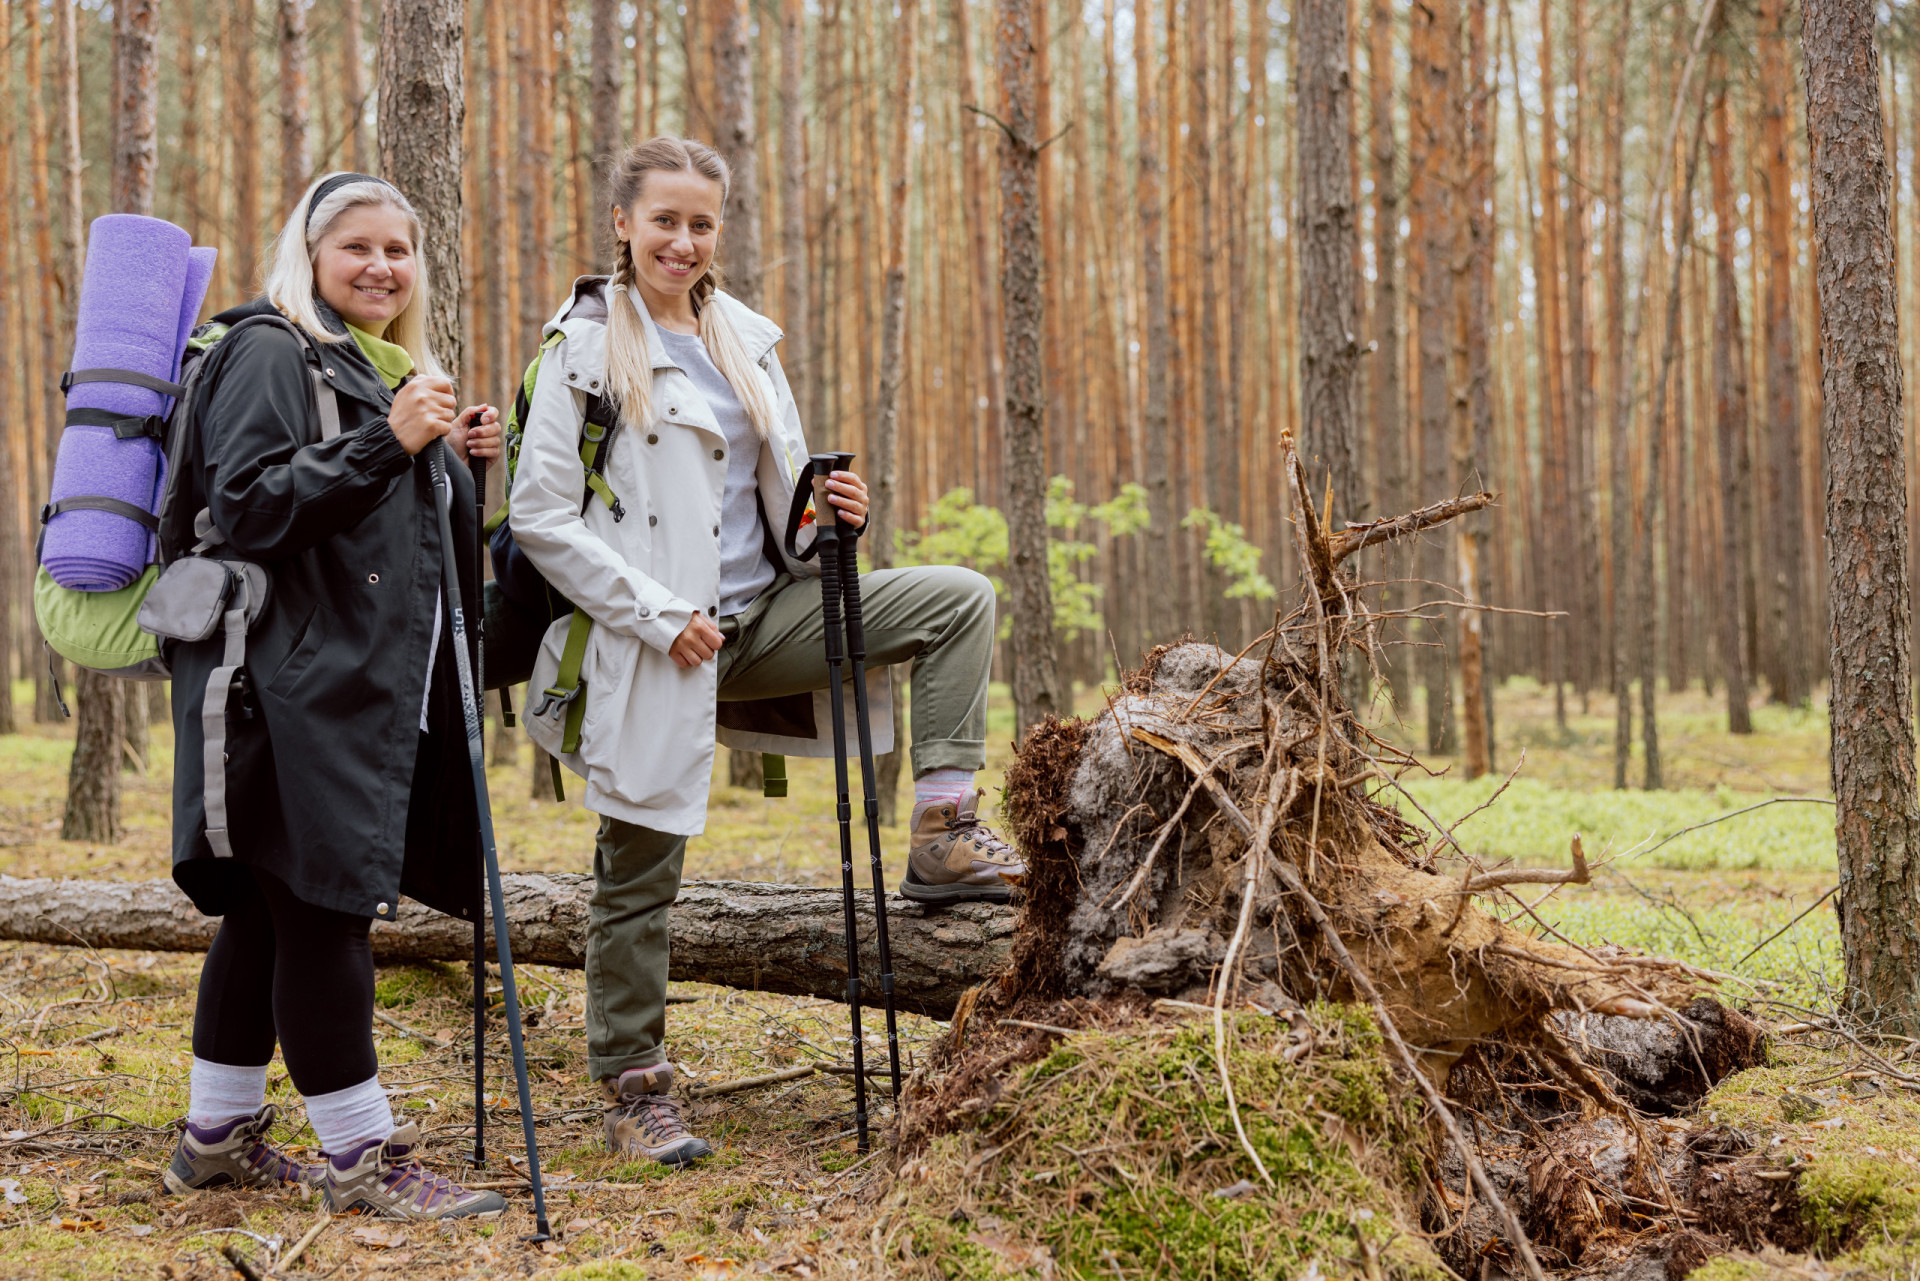 <p>Hiking with your mom (and family) can provide a boost of energy while giving you distraction-free time to catch up in nature.</p><p>You may also like:<a href="https://www.starsinsider.com/n/358466?utm_source=msn.com&utm_medium=display&utm_campaign=referral_description&utm_content=708861en-us"> Sports stars you didn't know had medical conditions</a></p>